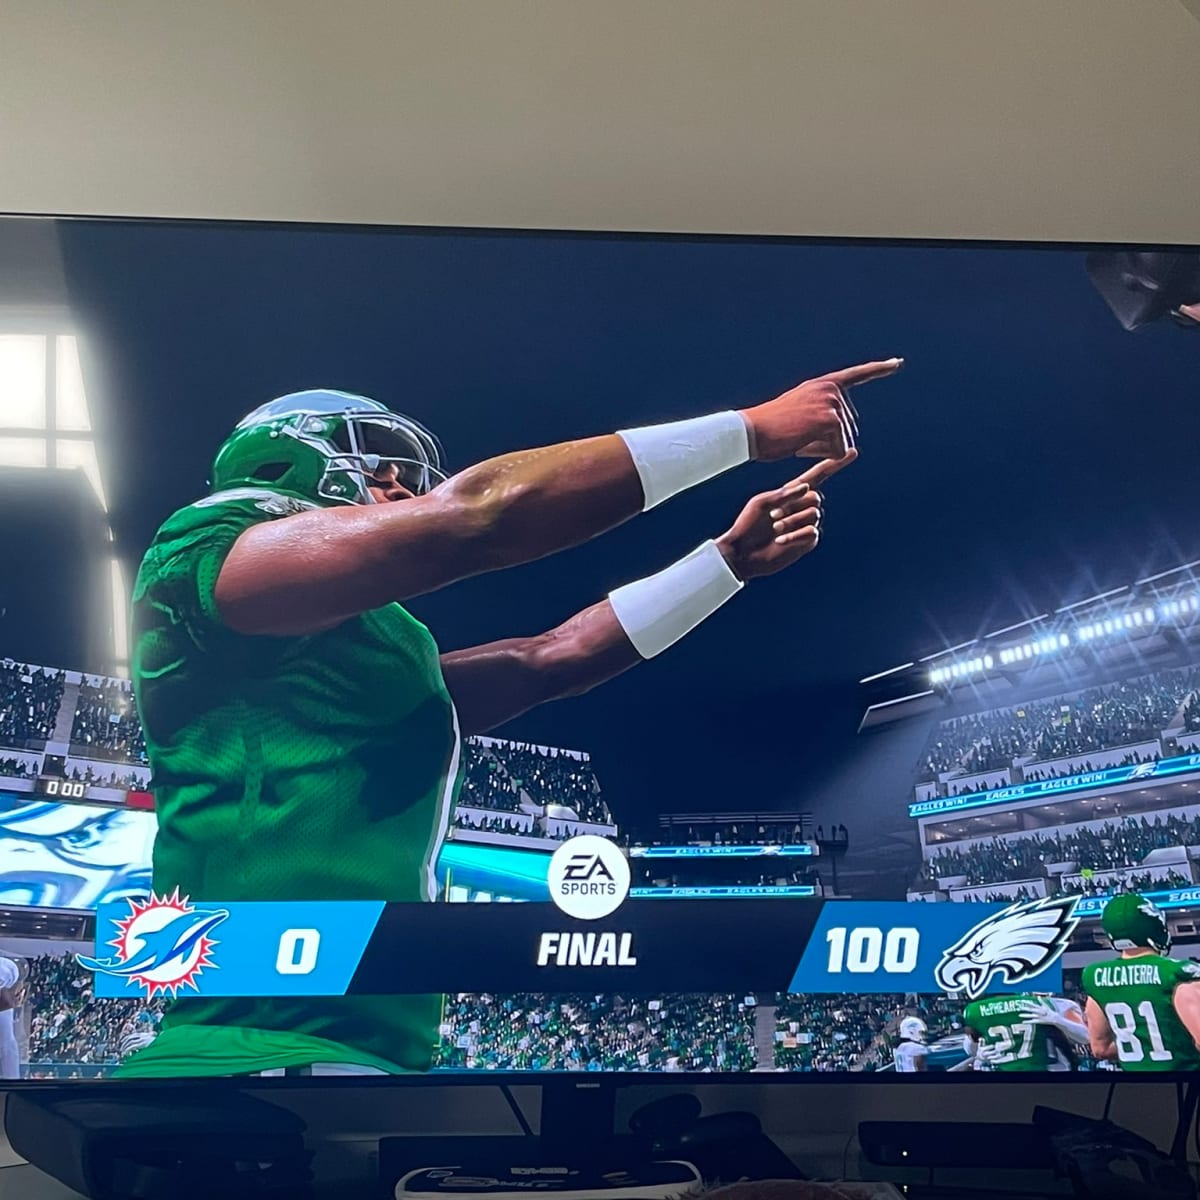 Kyle Brandt Defeats his 9-Year-Old Son 100-0 in Madden - Esports Illustrated